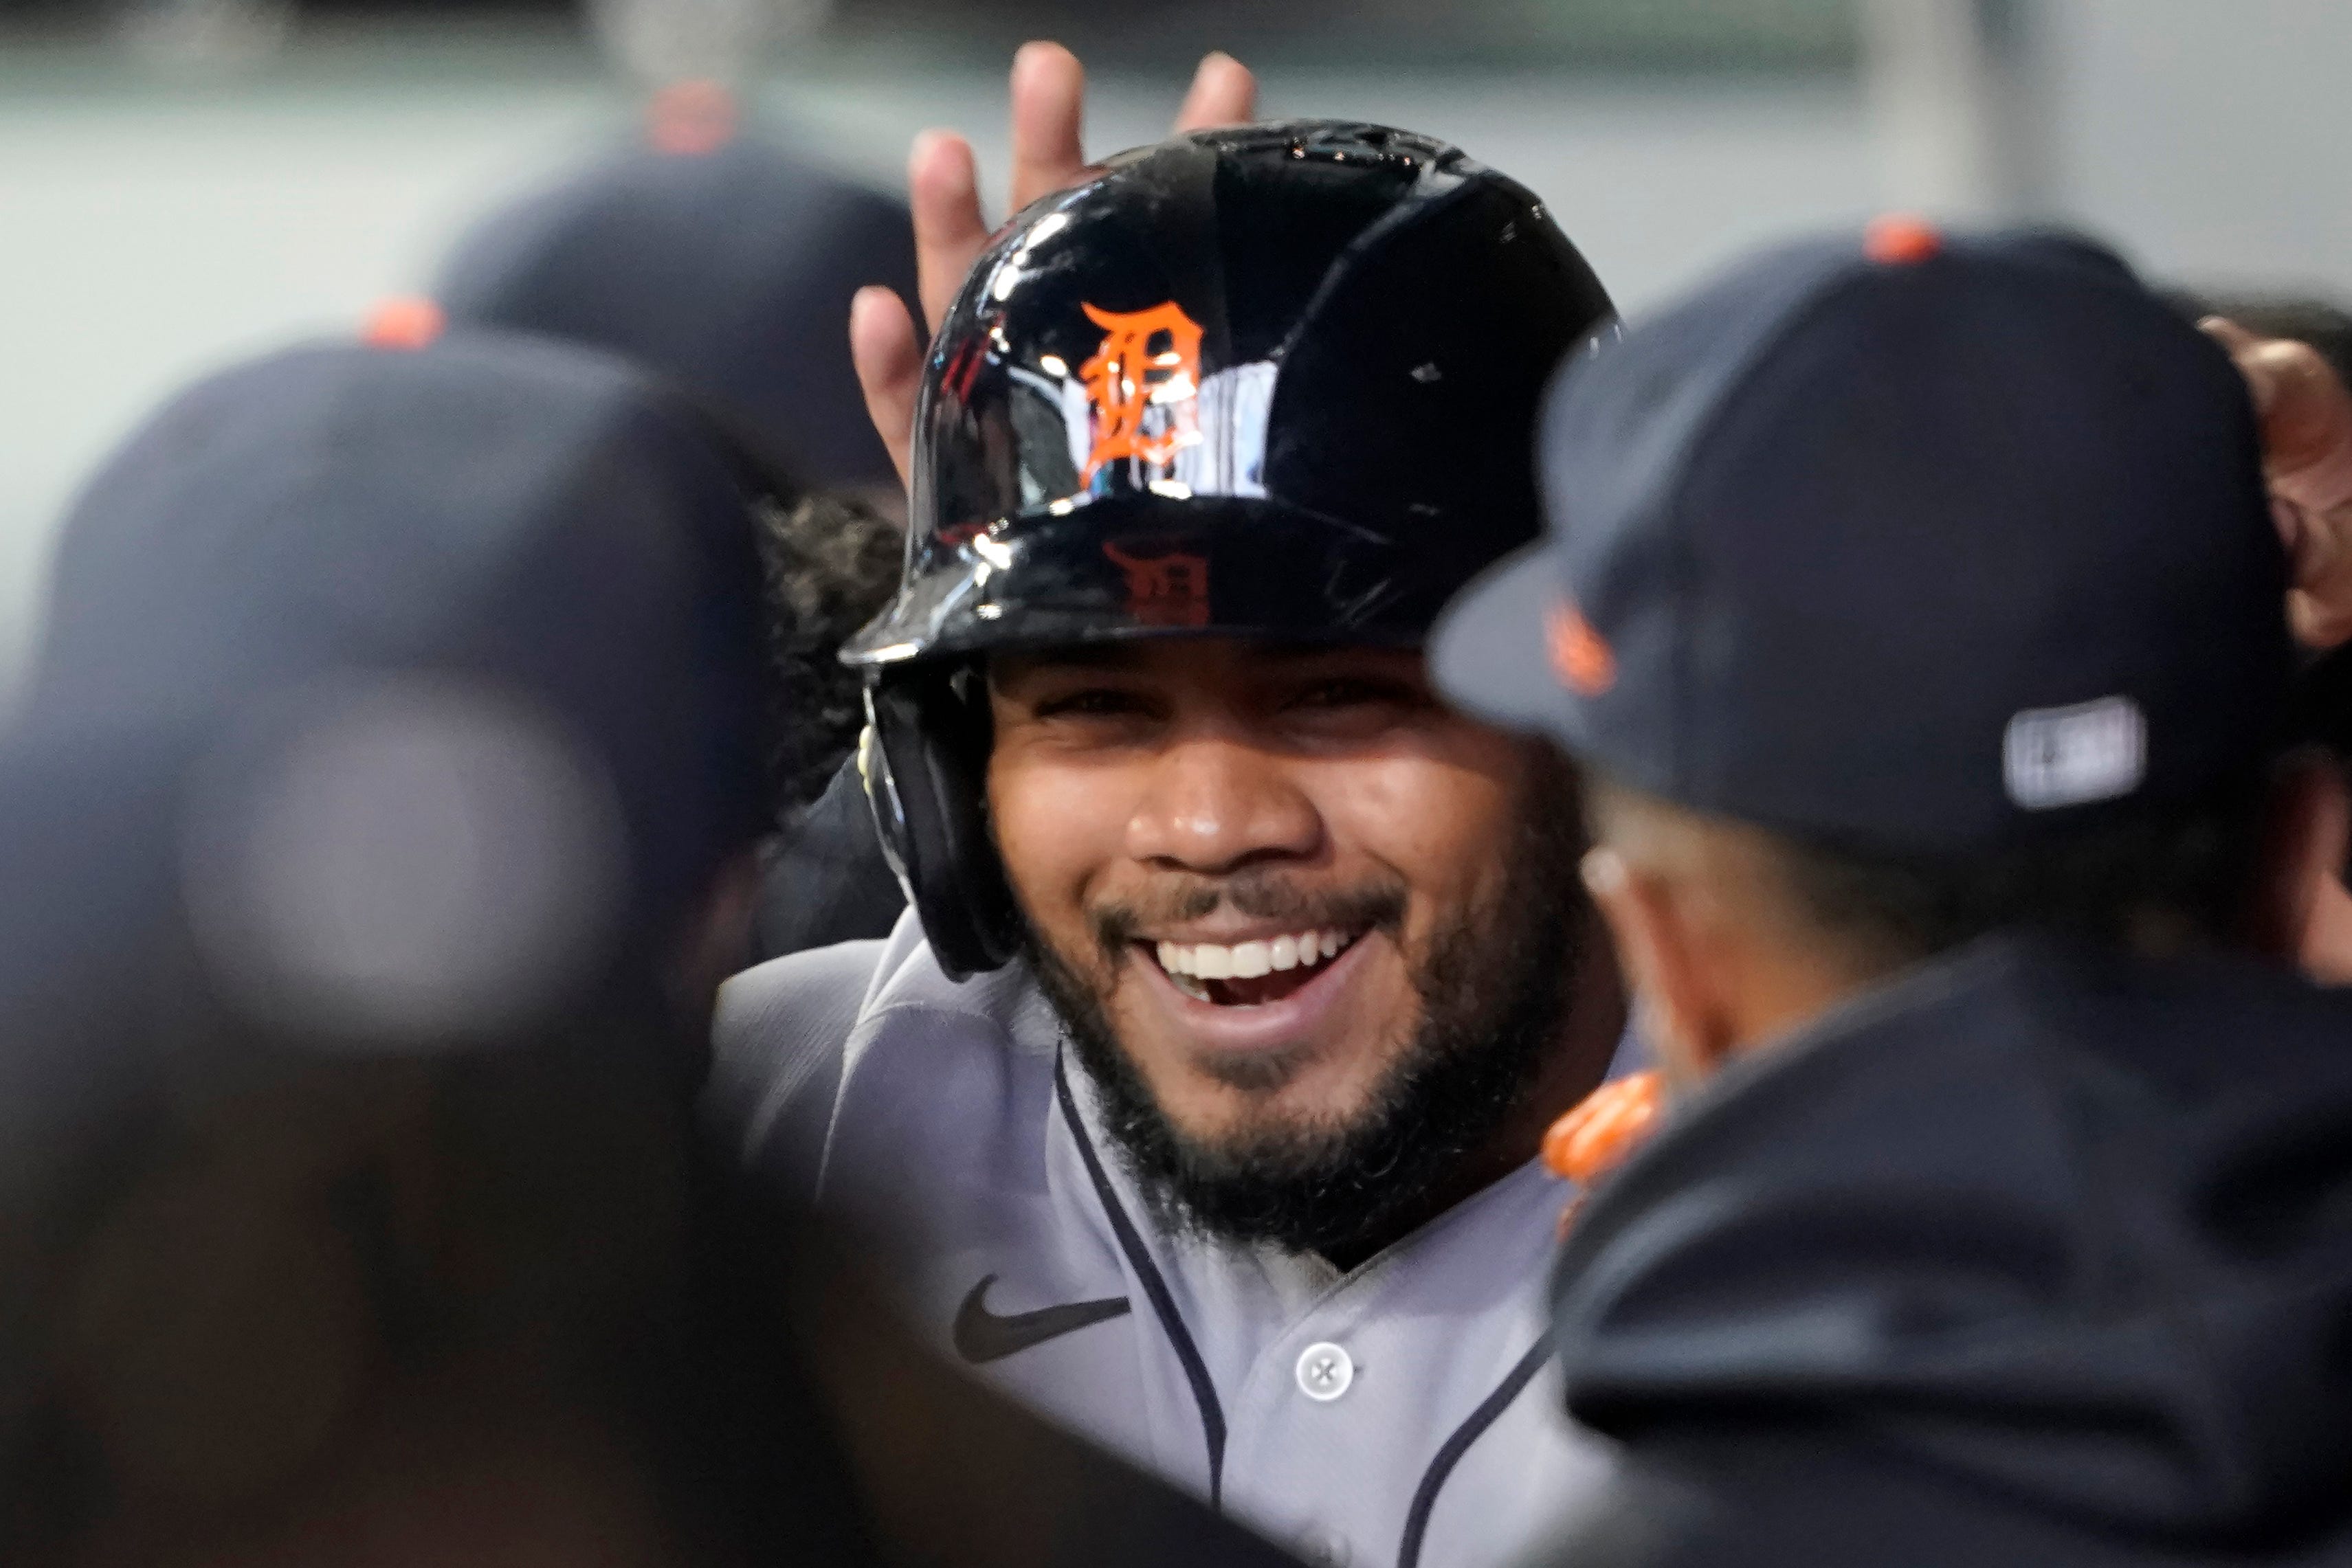 Detroit Tigers' Jeimer Candelario is greeted in the dugout after he hit a solo home run against the Seattle Mariners during the first inning.